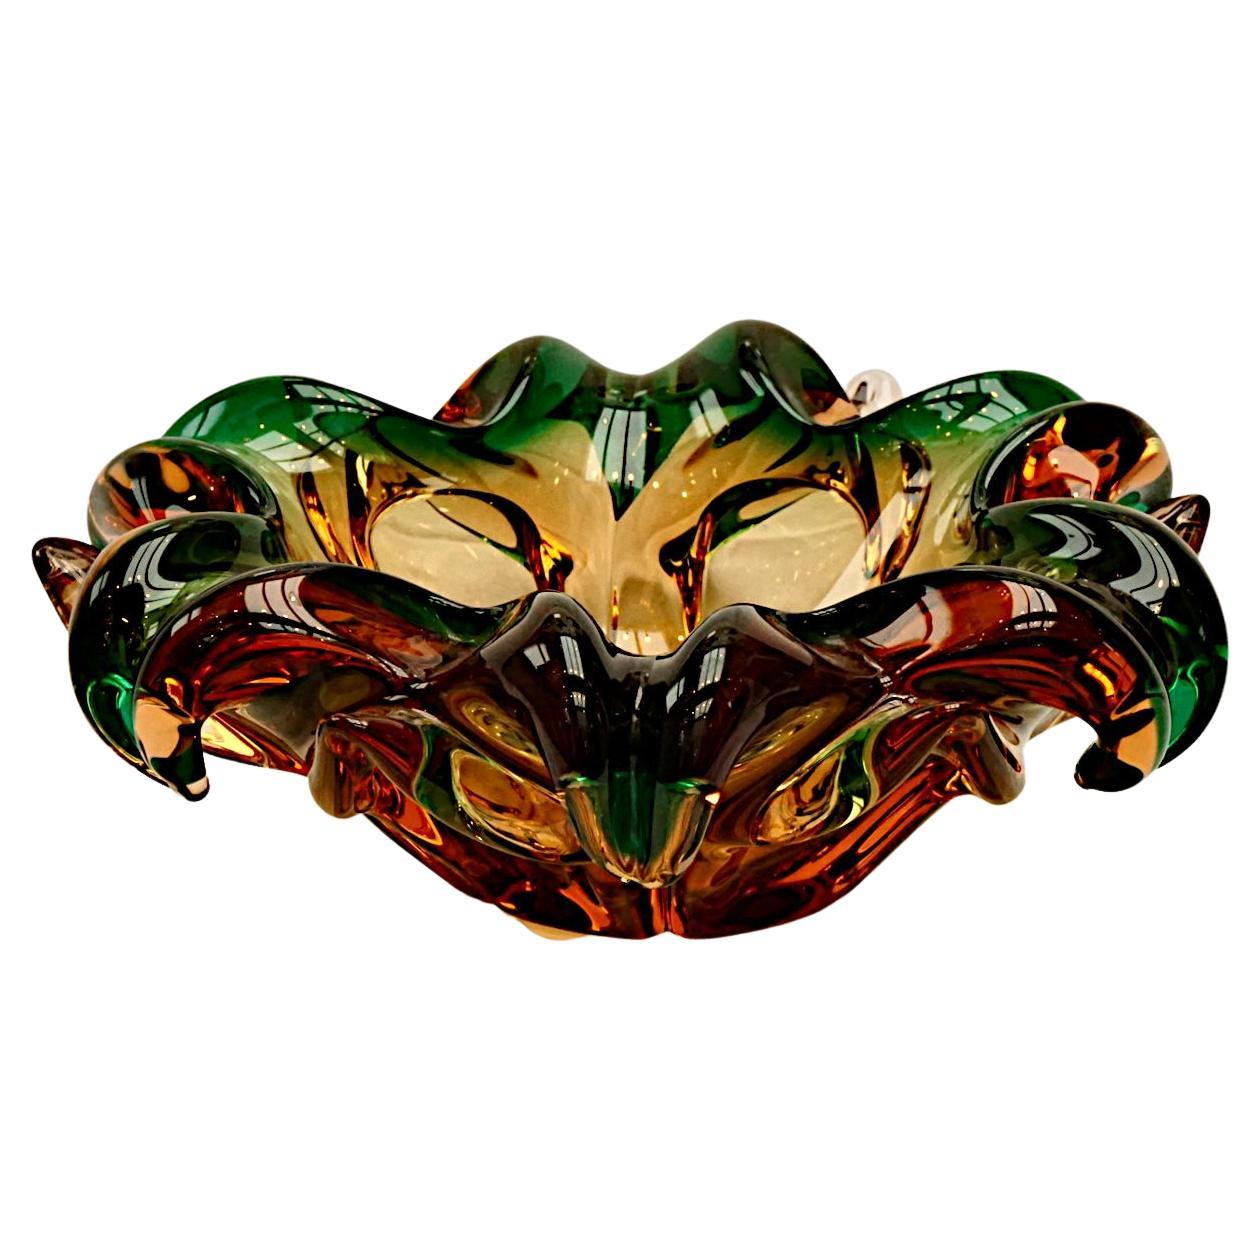 Hand Made Bronze and Green Art Glass Bowl, Circa 1960s For Sale